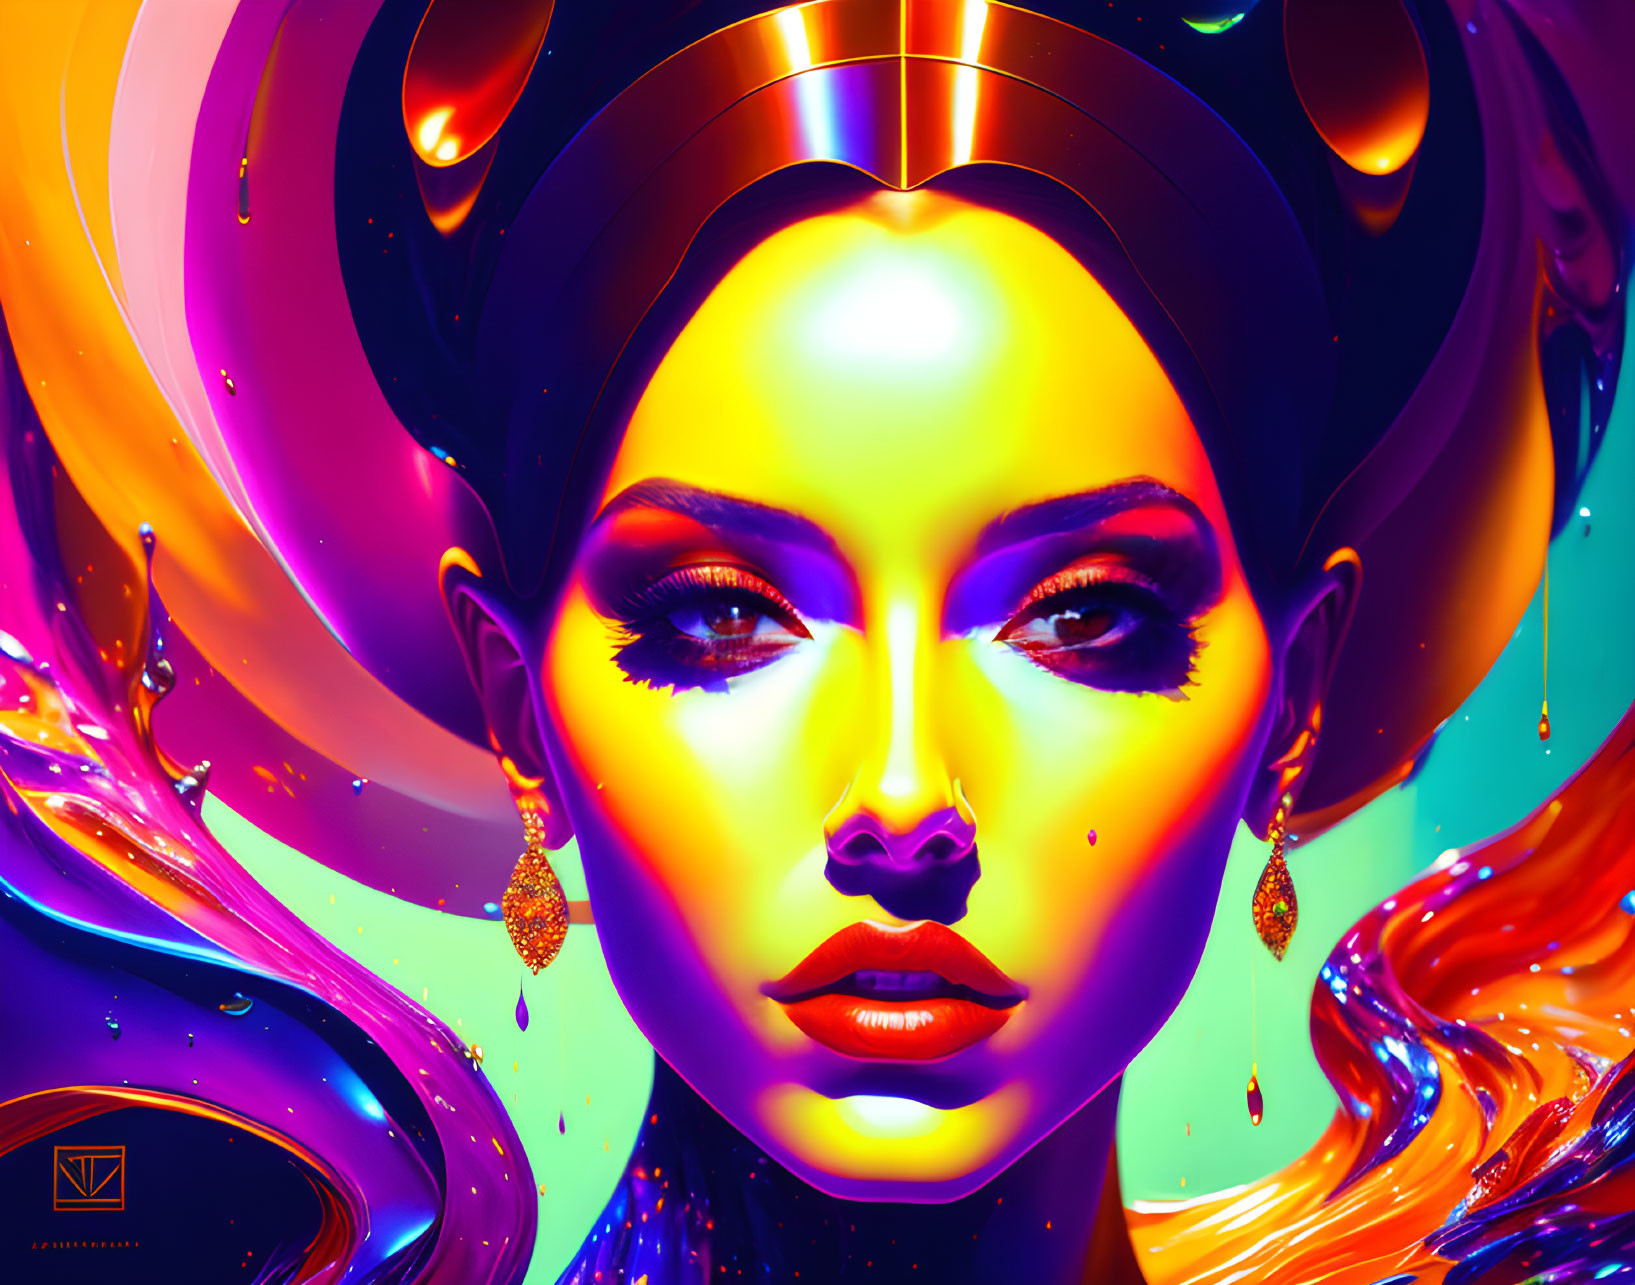 Colorful digital portrait of woman with flowing liquid and cosmic accessories